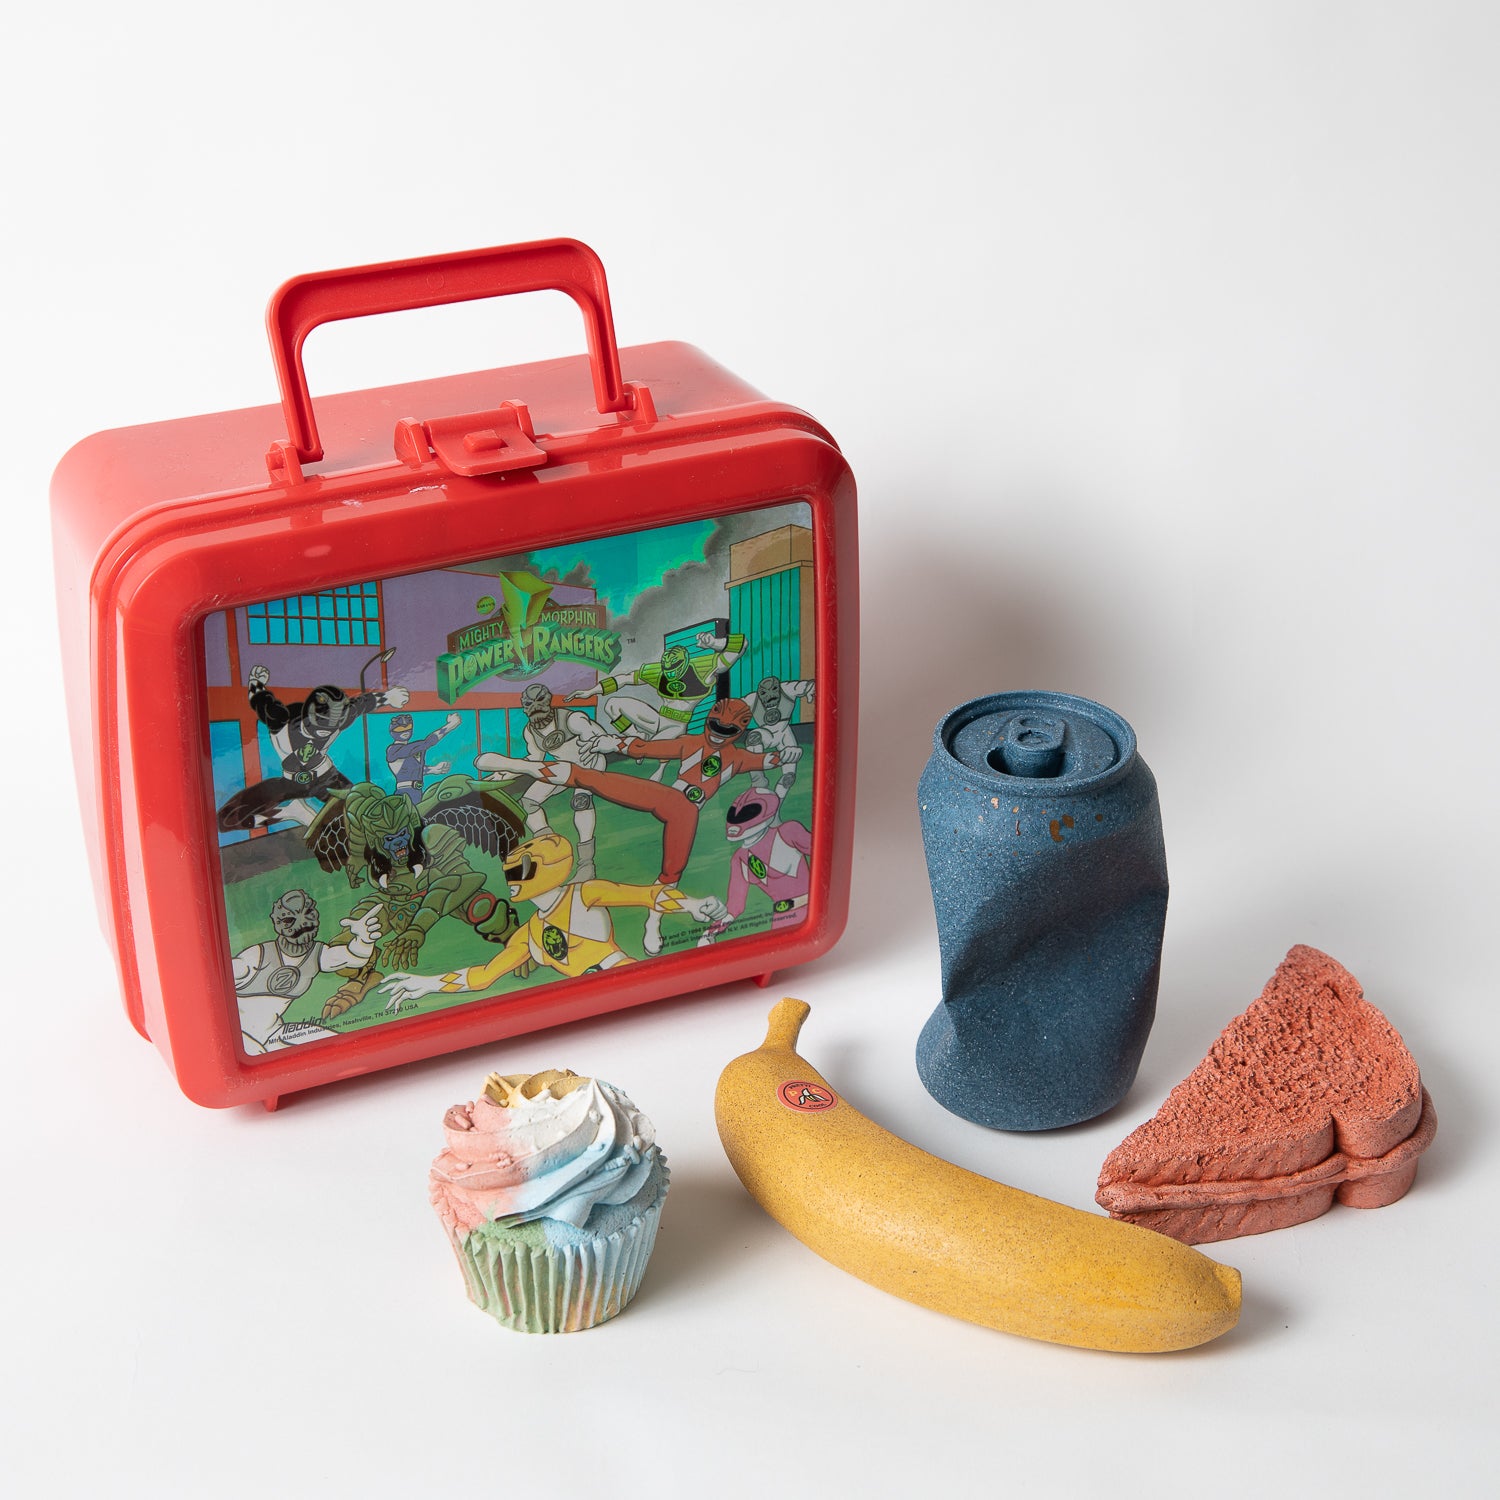 Set of concrete food shaped items with vintage Power Rangers lunch box